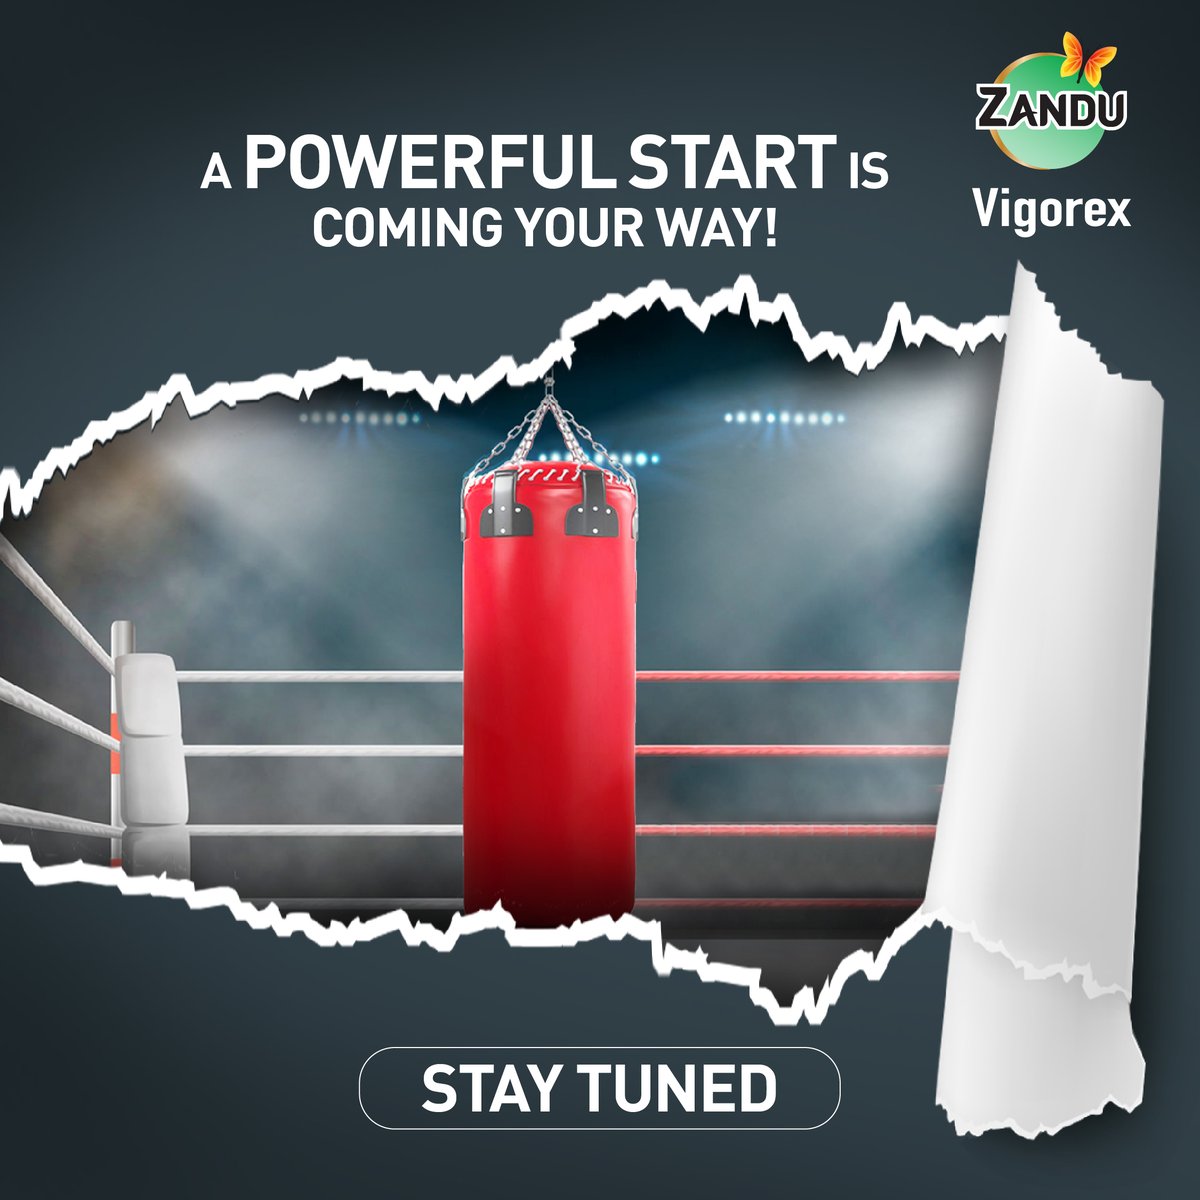 Exciting News Coming Soon. Get ready for our “Powerful” collaboration with the first Olympic Boxer Champion.

Stay Tuned to know more.

#ZanduVigorex #Zandu #Powerful #Boxing #PowerfulCollaboration #OlympicBoxerChampion